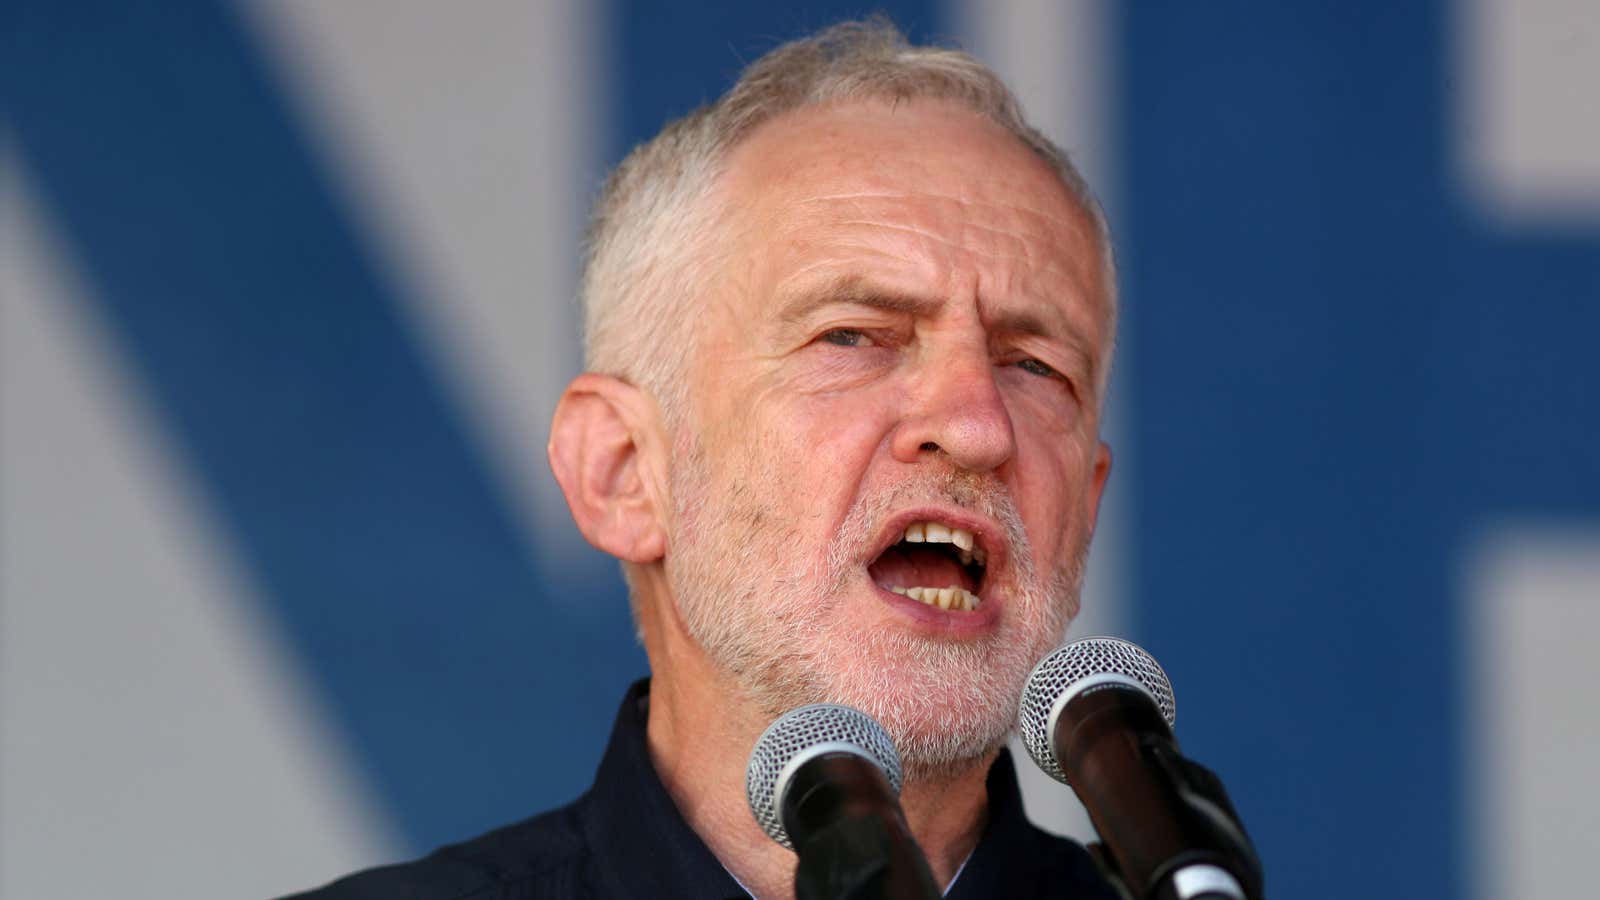 Jeremy Corbyn has been accused of anti-semitism.